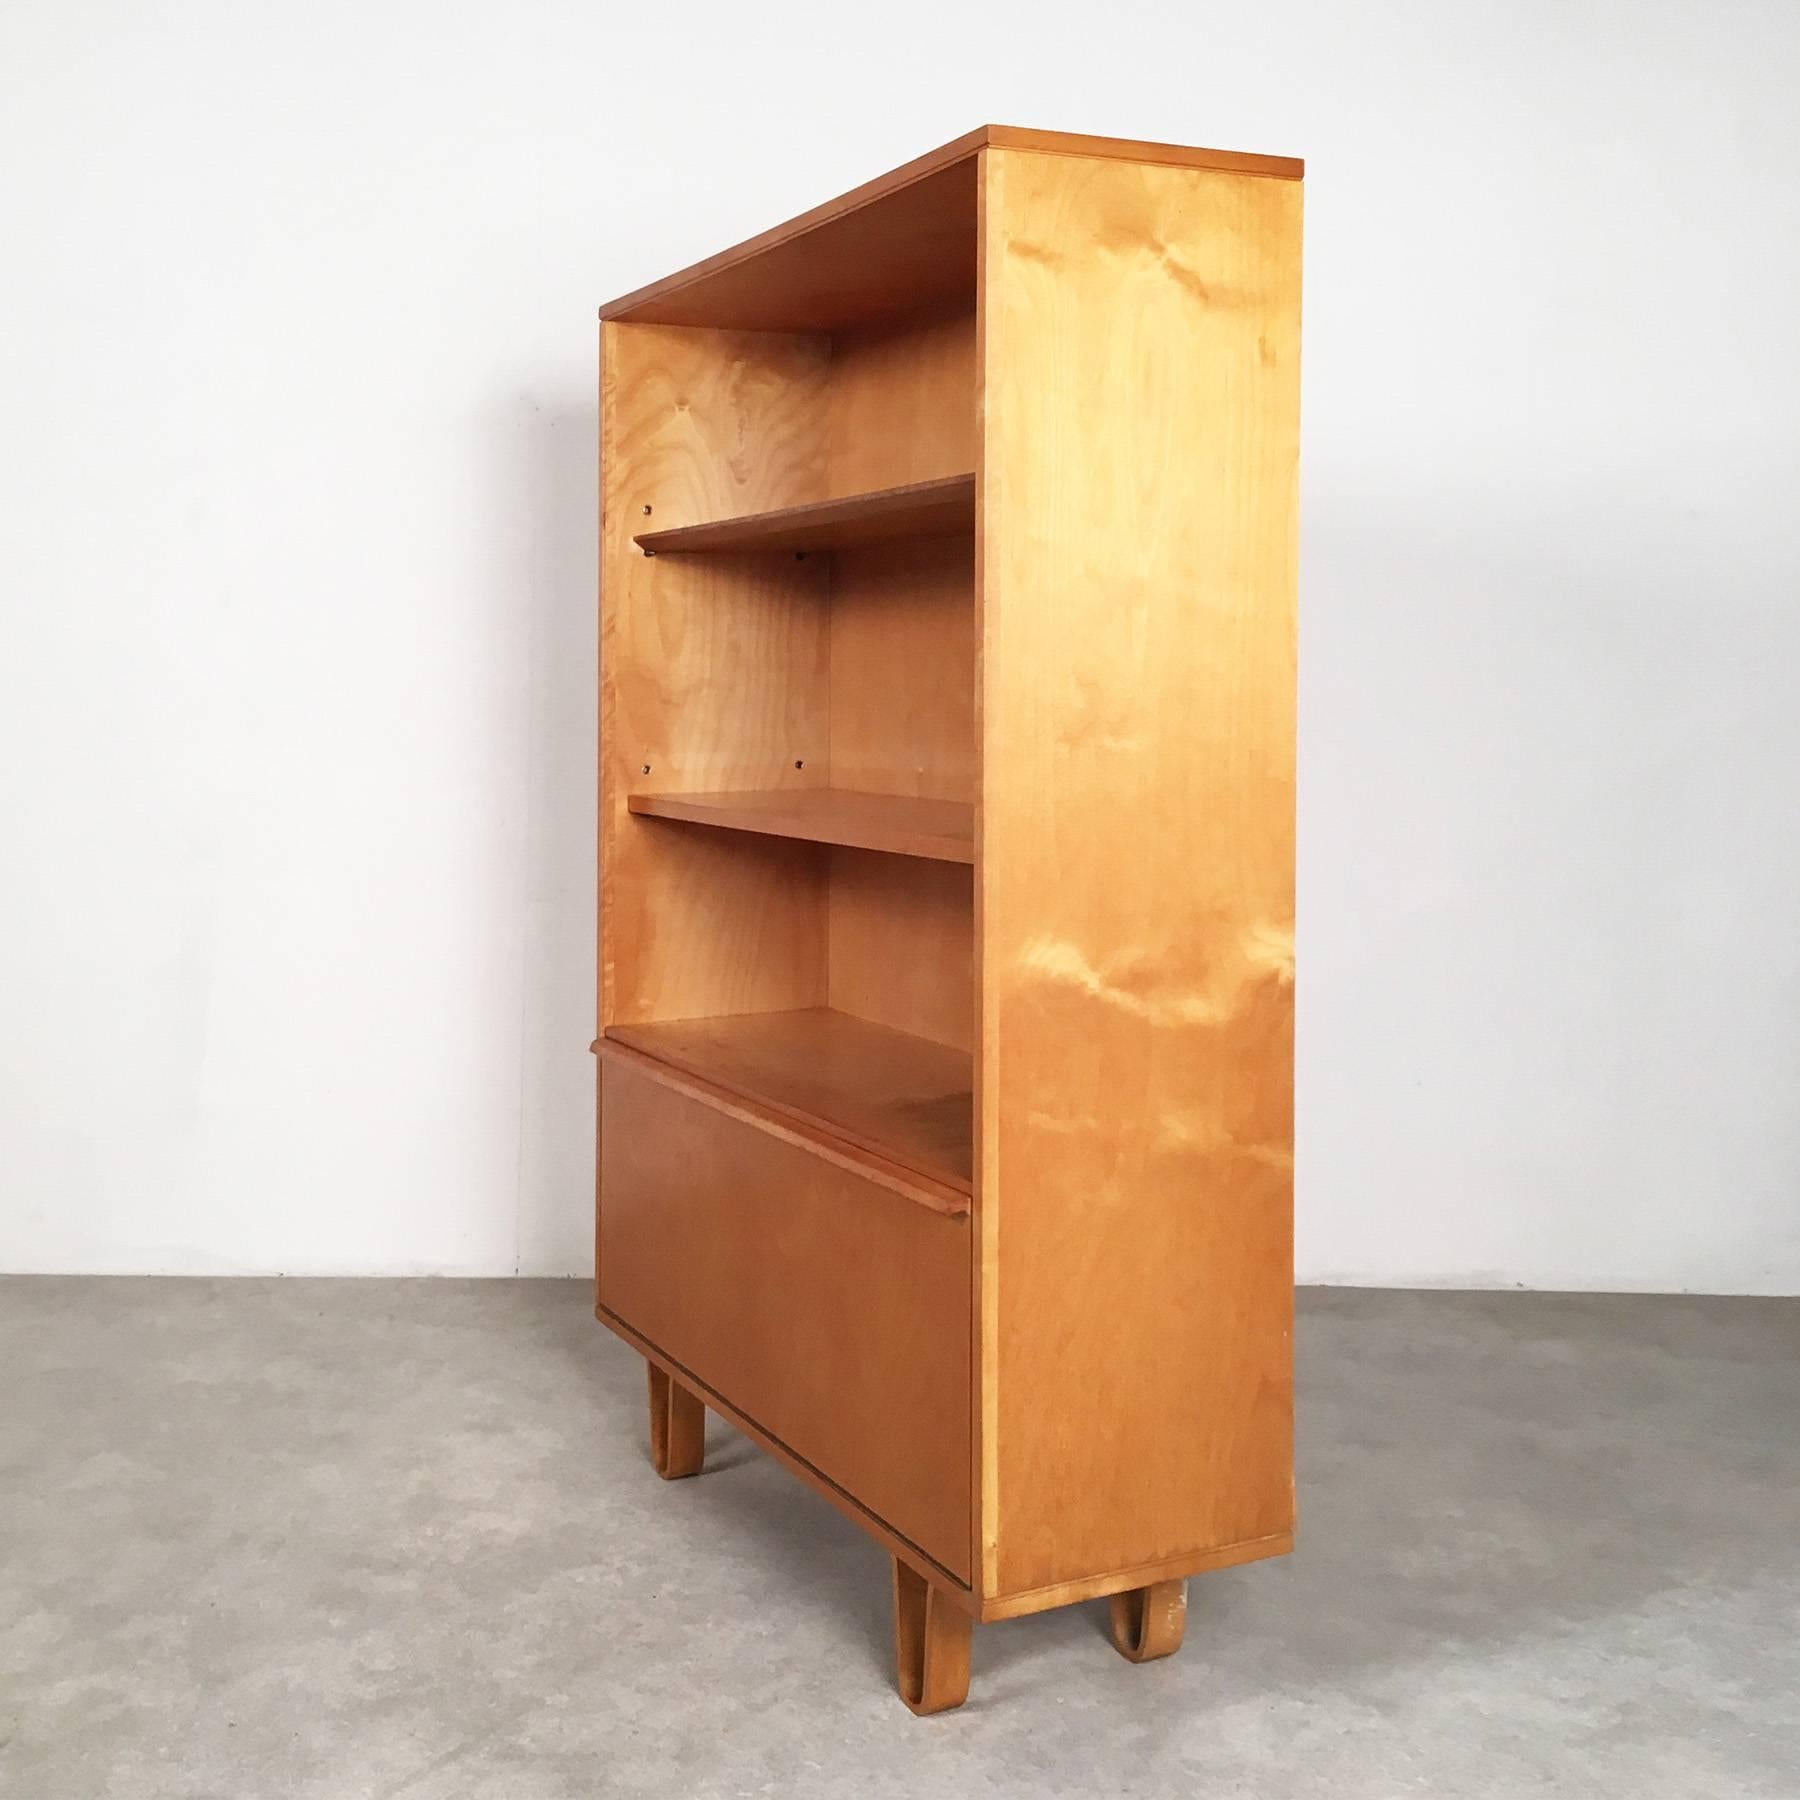 Beautiful bookcase from the Birch series, designed in the 1950s by Cees Braakman, manufactured in the Netherlands by Pastoe. The Birch series is one of the most beautiful and sought after works of Braakman. It stands out for its simple but beautiful